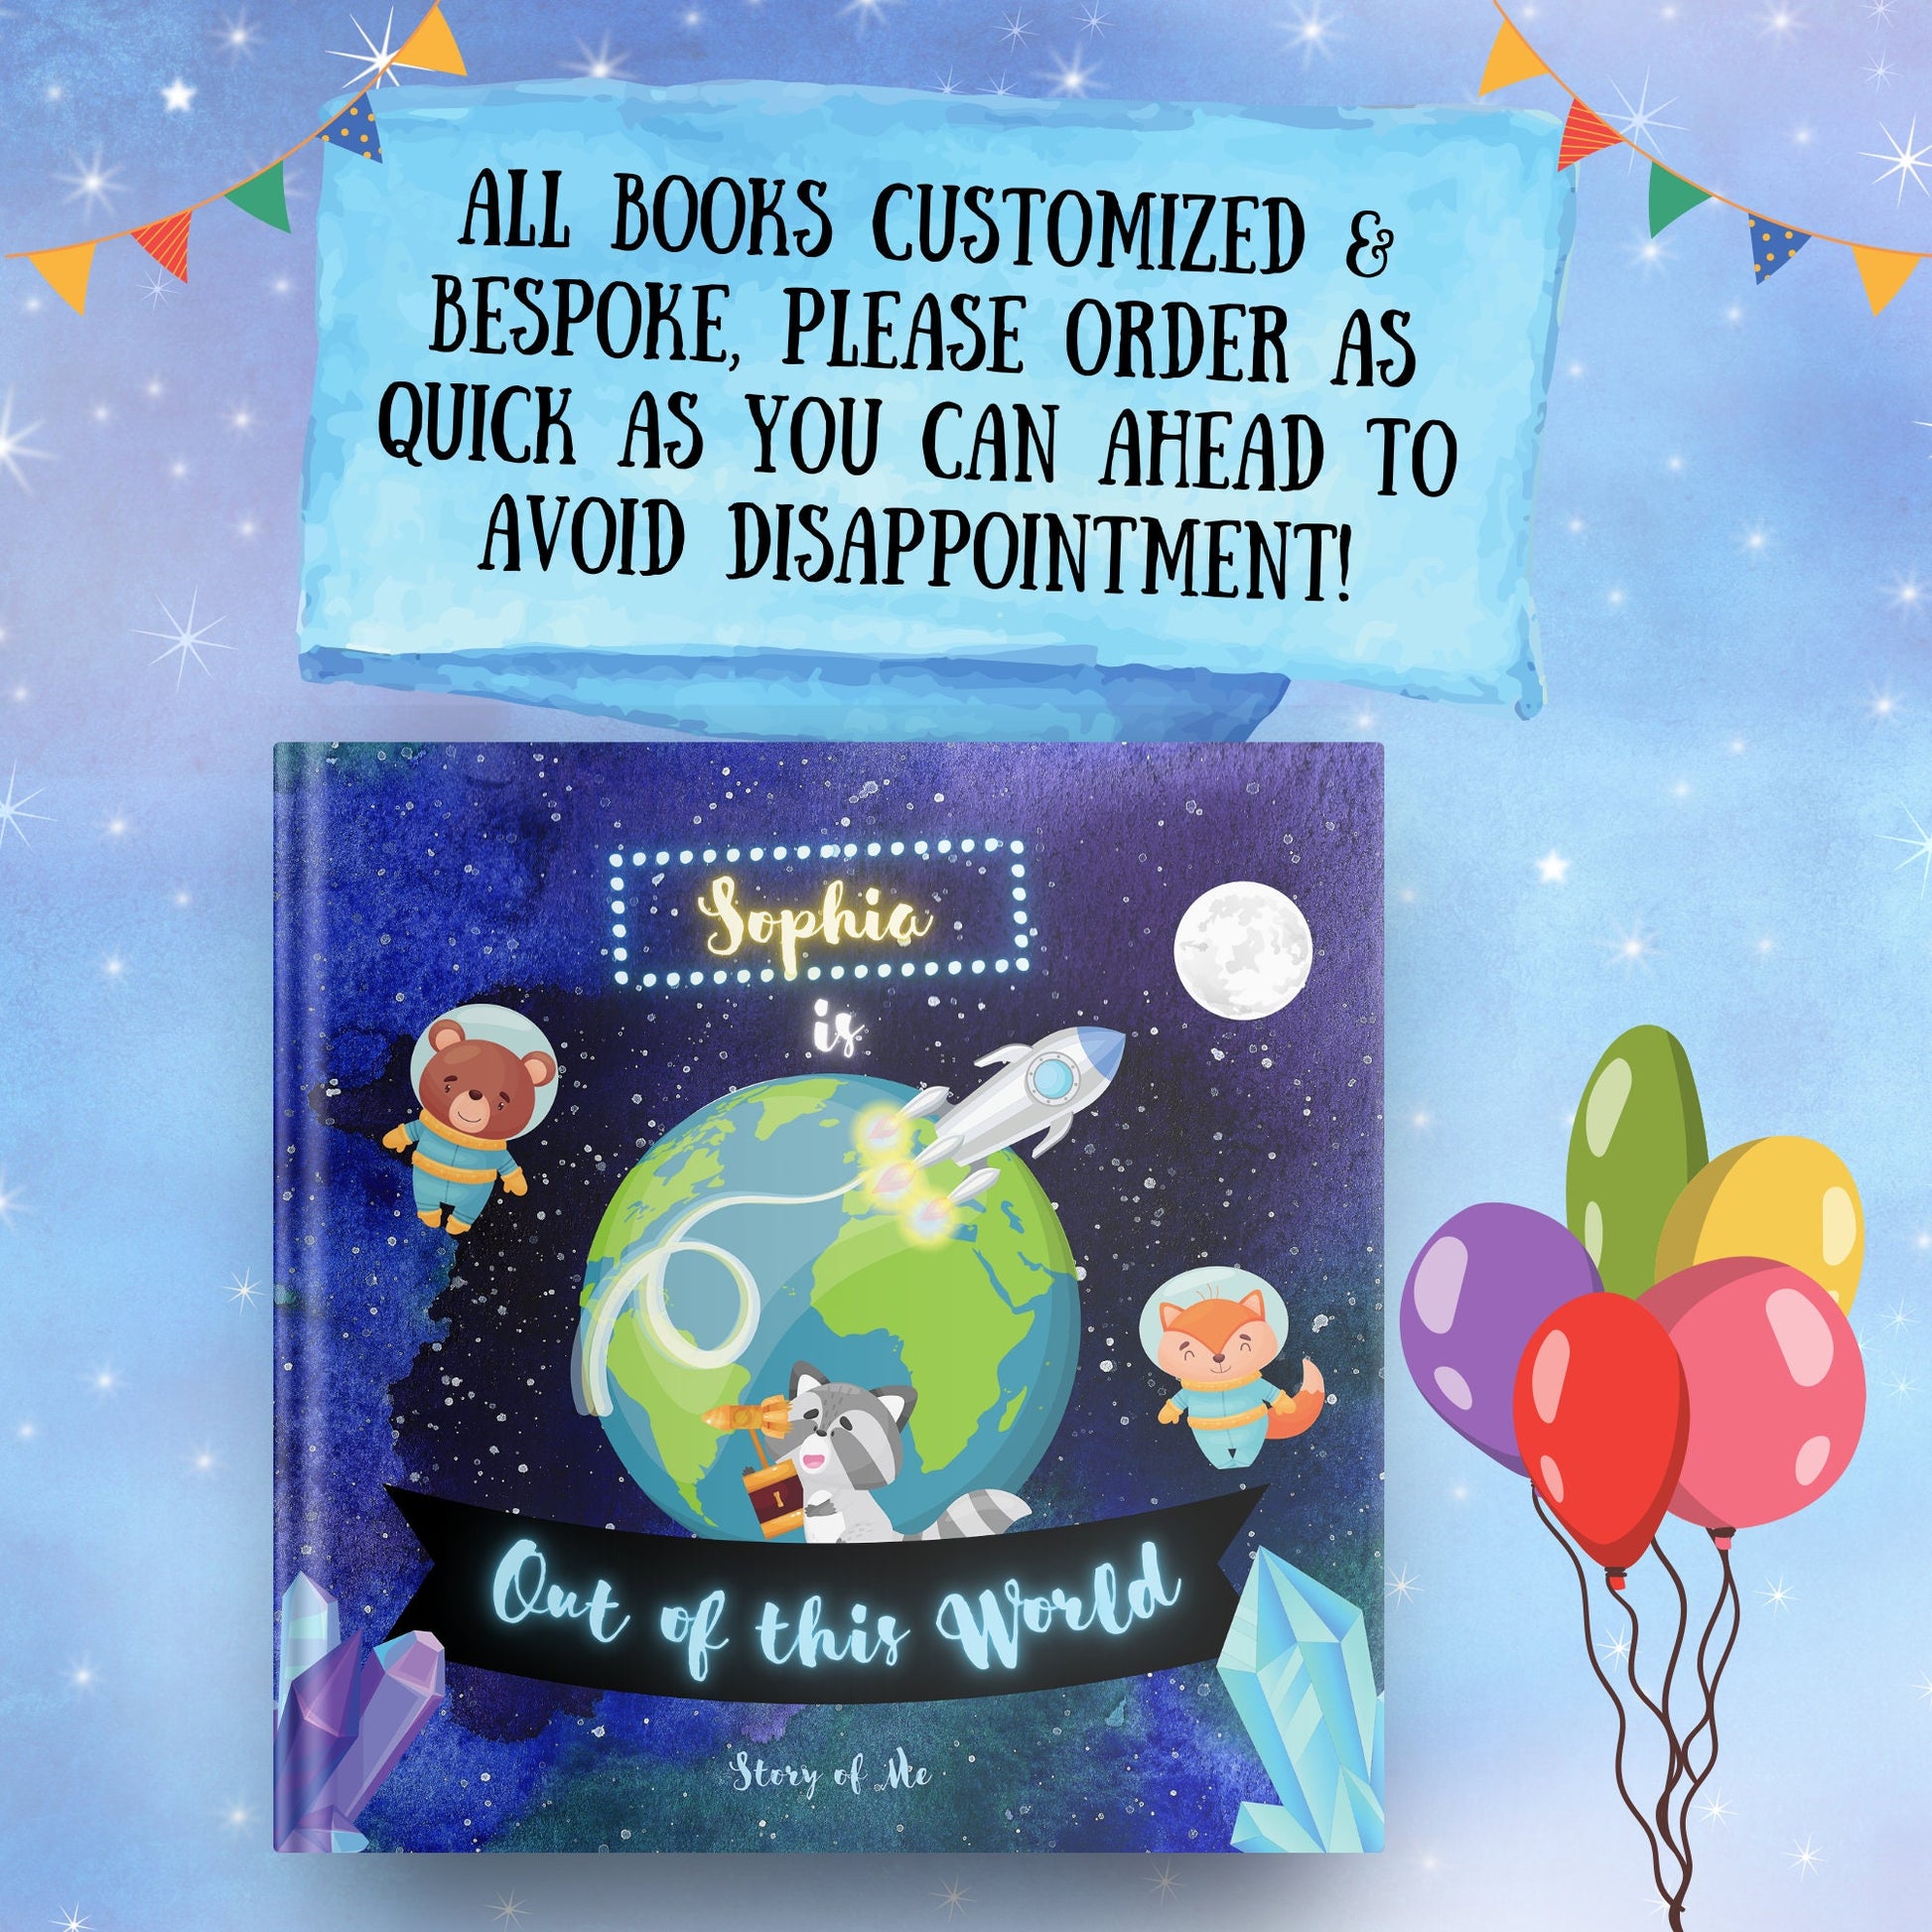 Personalized Birthday Book, Personalized Children's Book